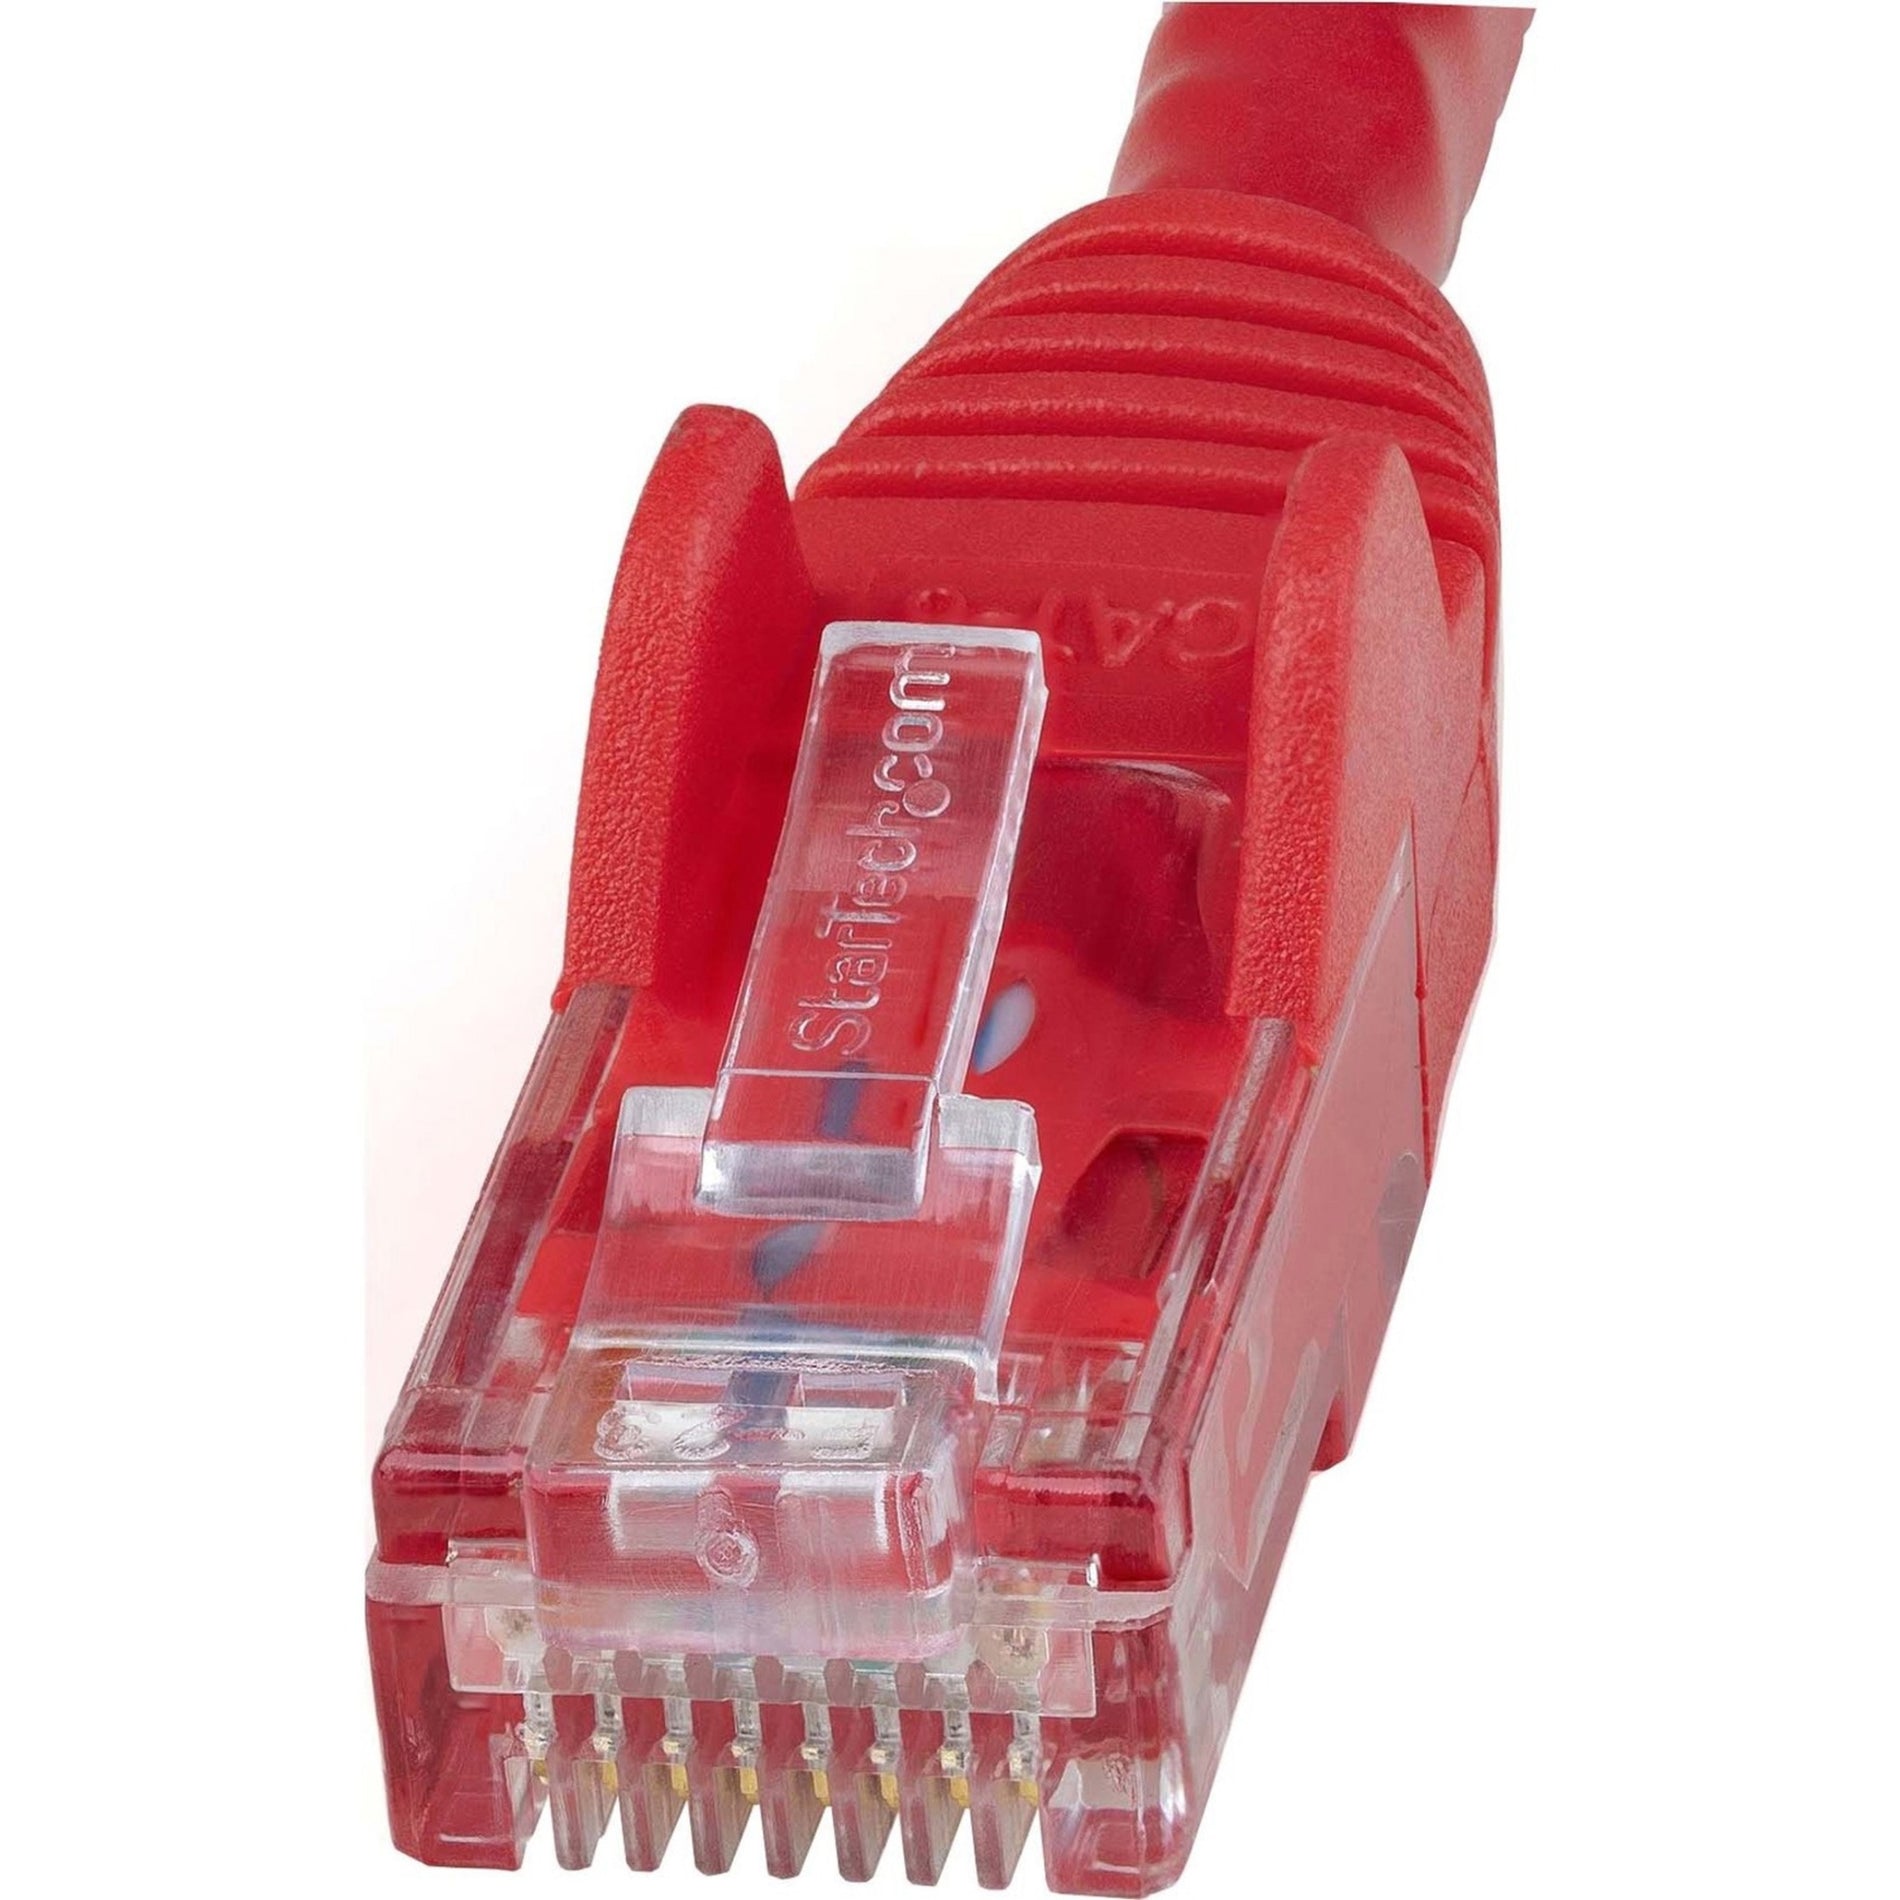 StarTech.com N6PATCH75RD 75 ft Red Snagless Cat6 UTP Patch Cable, Lifetime Warranty, 10 Gbit/s Data Transfer Rate, Gold Connectors